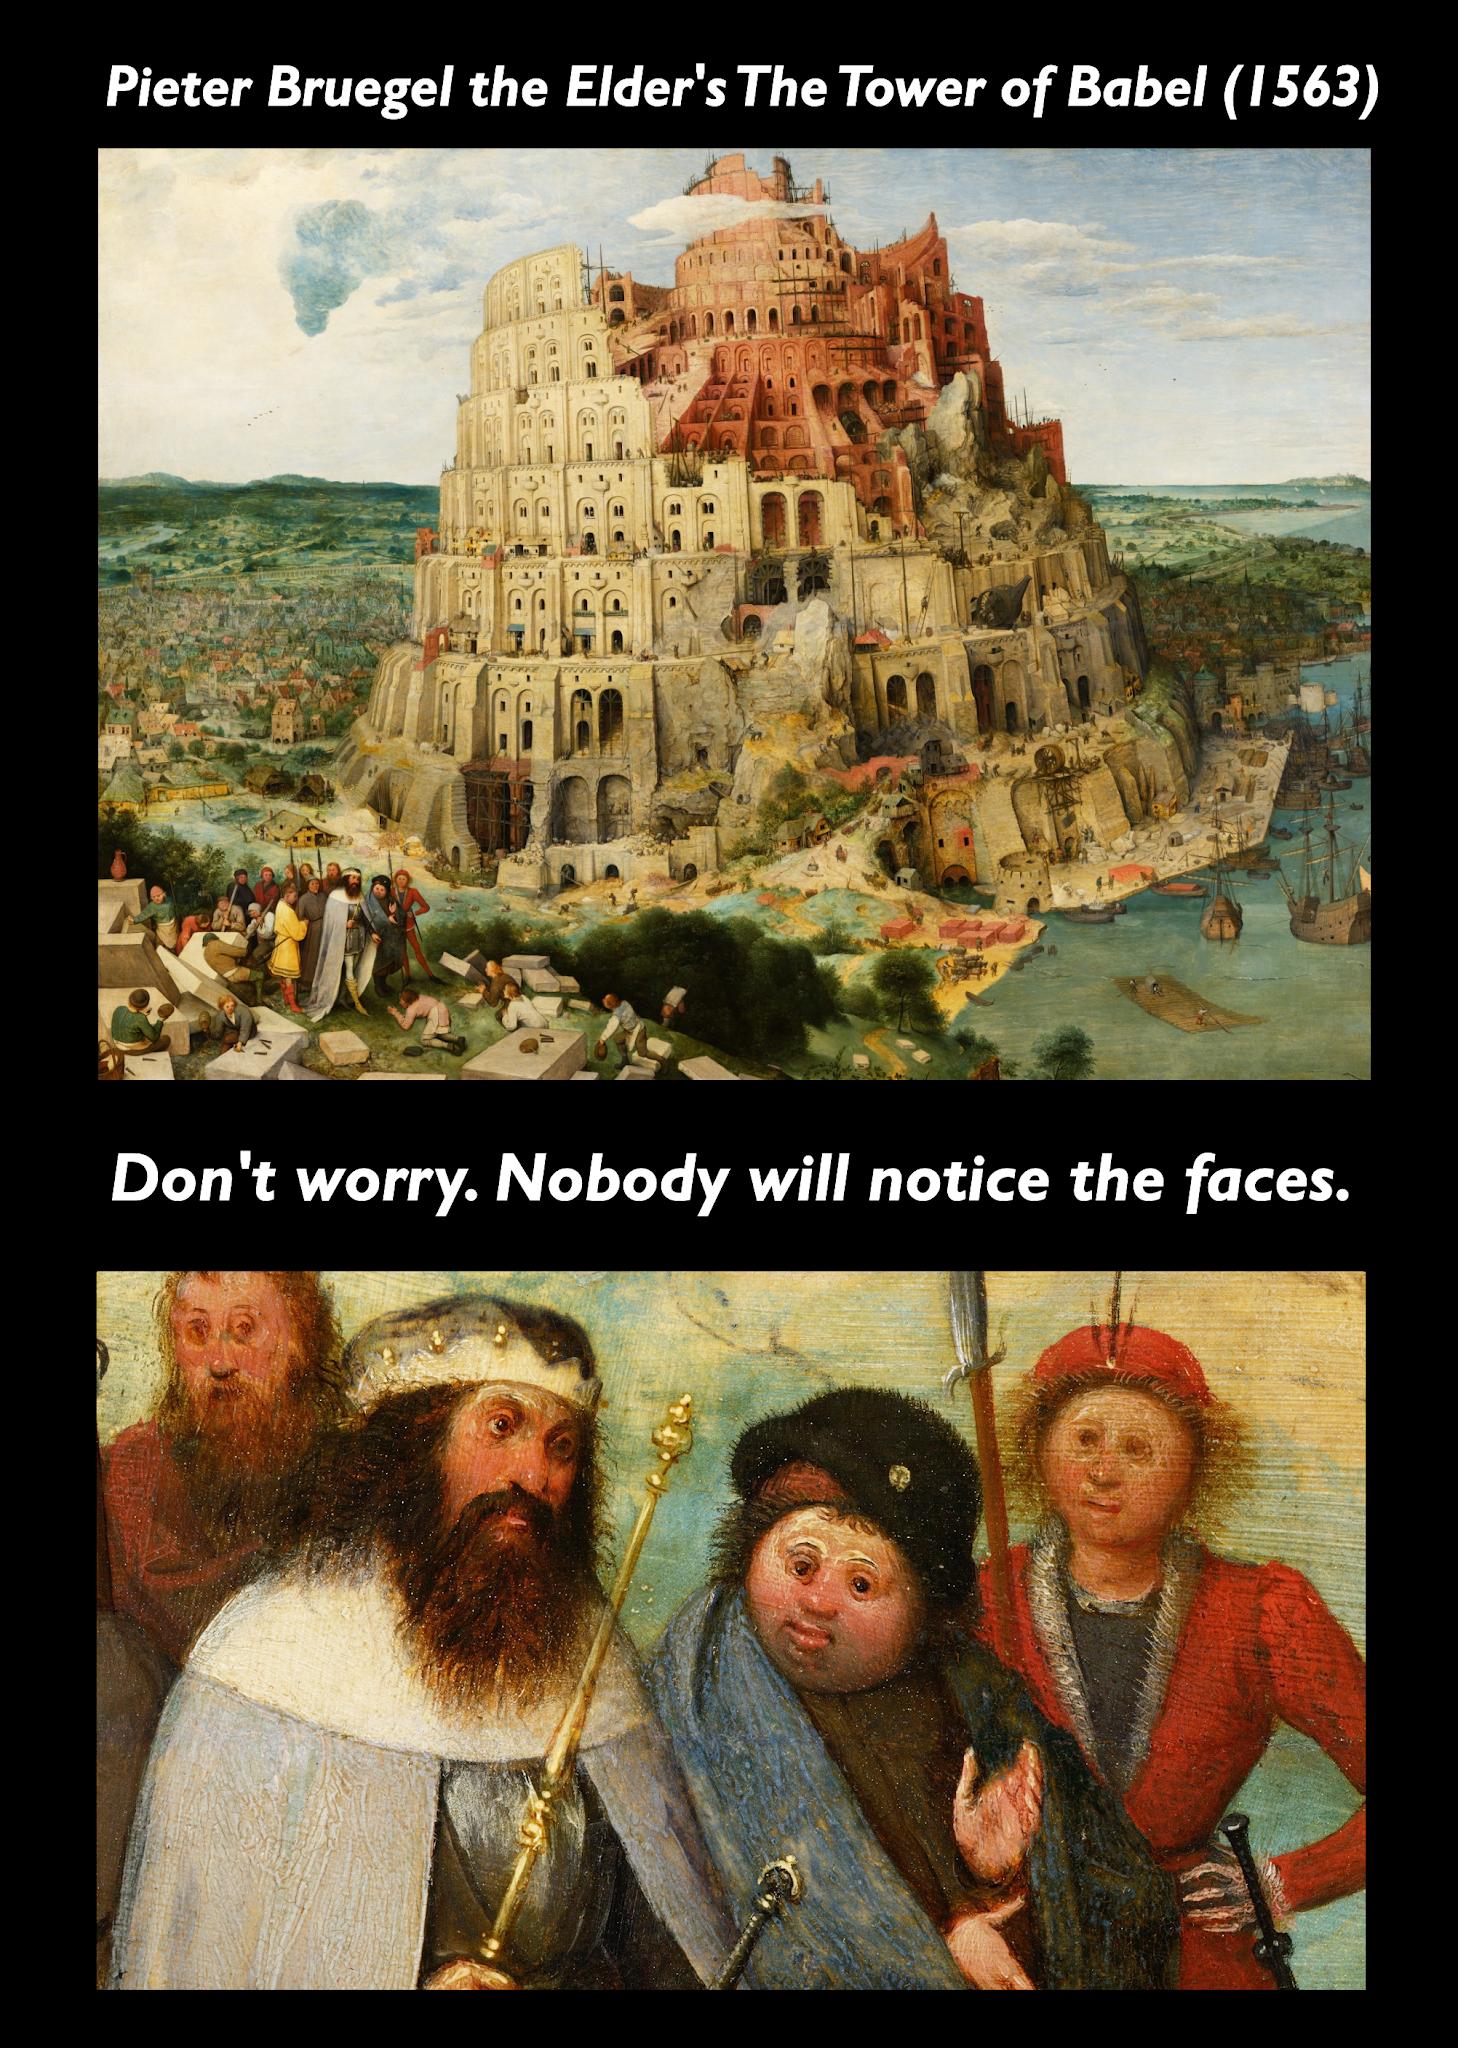 tower of babel - Pieter Bruegel the Elder's The Tower of Babel 1563 Don't worry. Nobody will notice the faces.